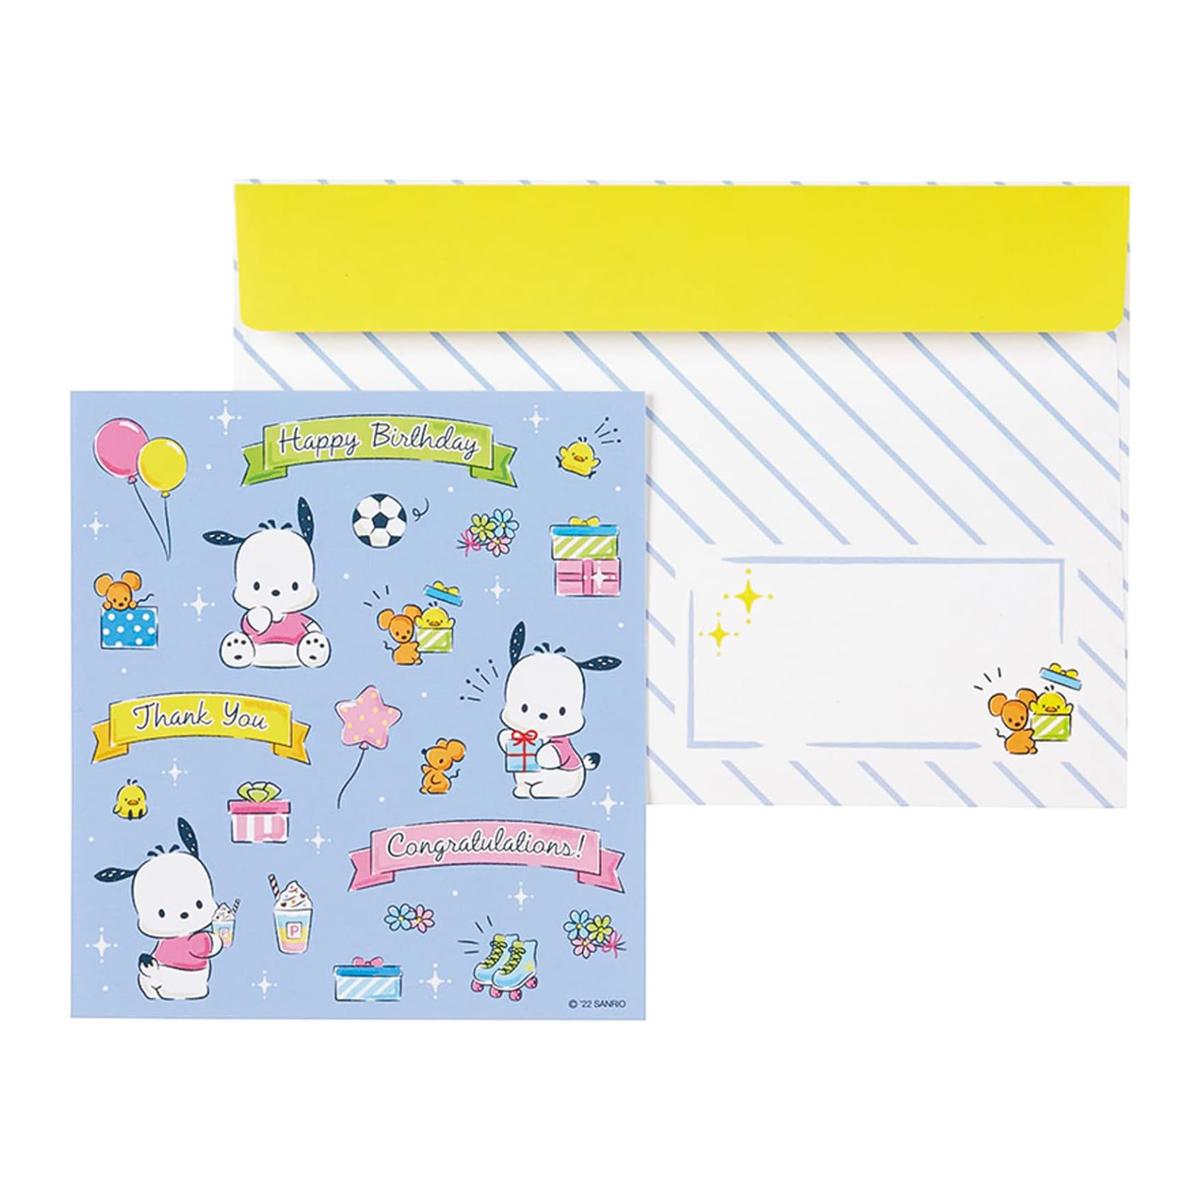 Pochacco Stickers and Greeting Card (Small Gift Series) Stationery Japan Original   